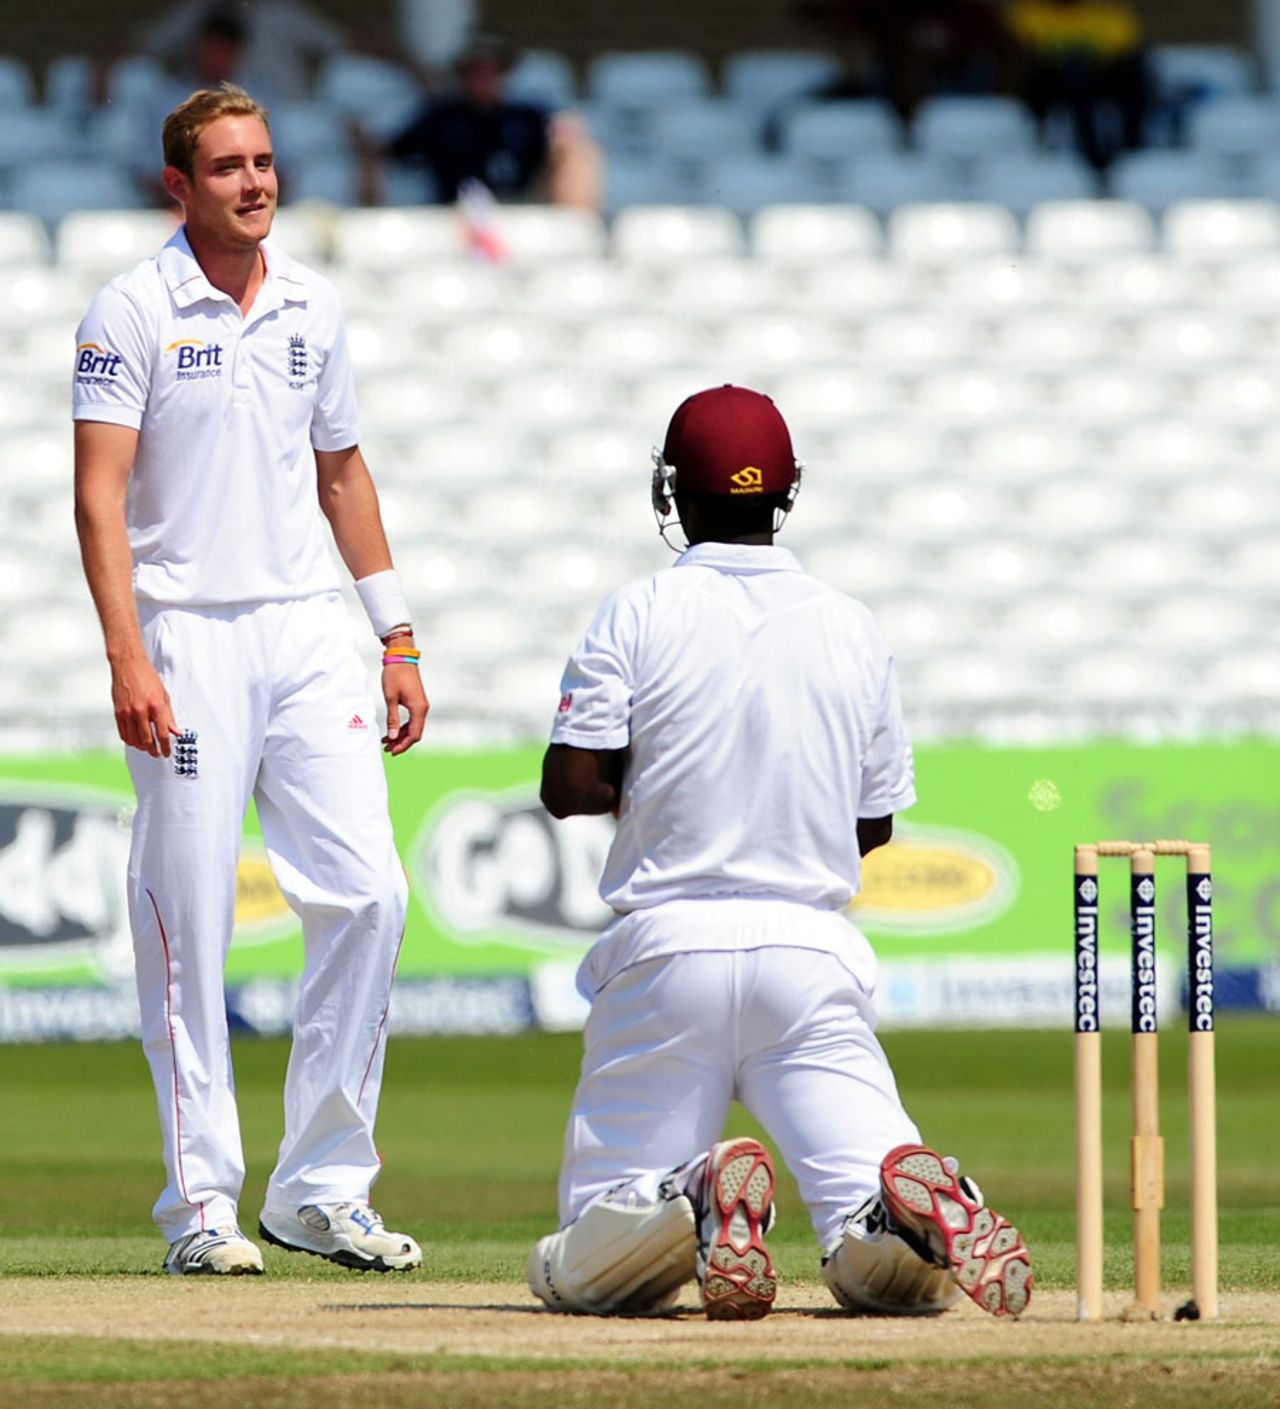 Stuart Broad can't find a way through, even with Darren Sammy on his knees, England v West Indies, 2nd Test, Trent Bridge, 4th day, May 28, 2012